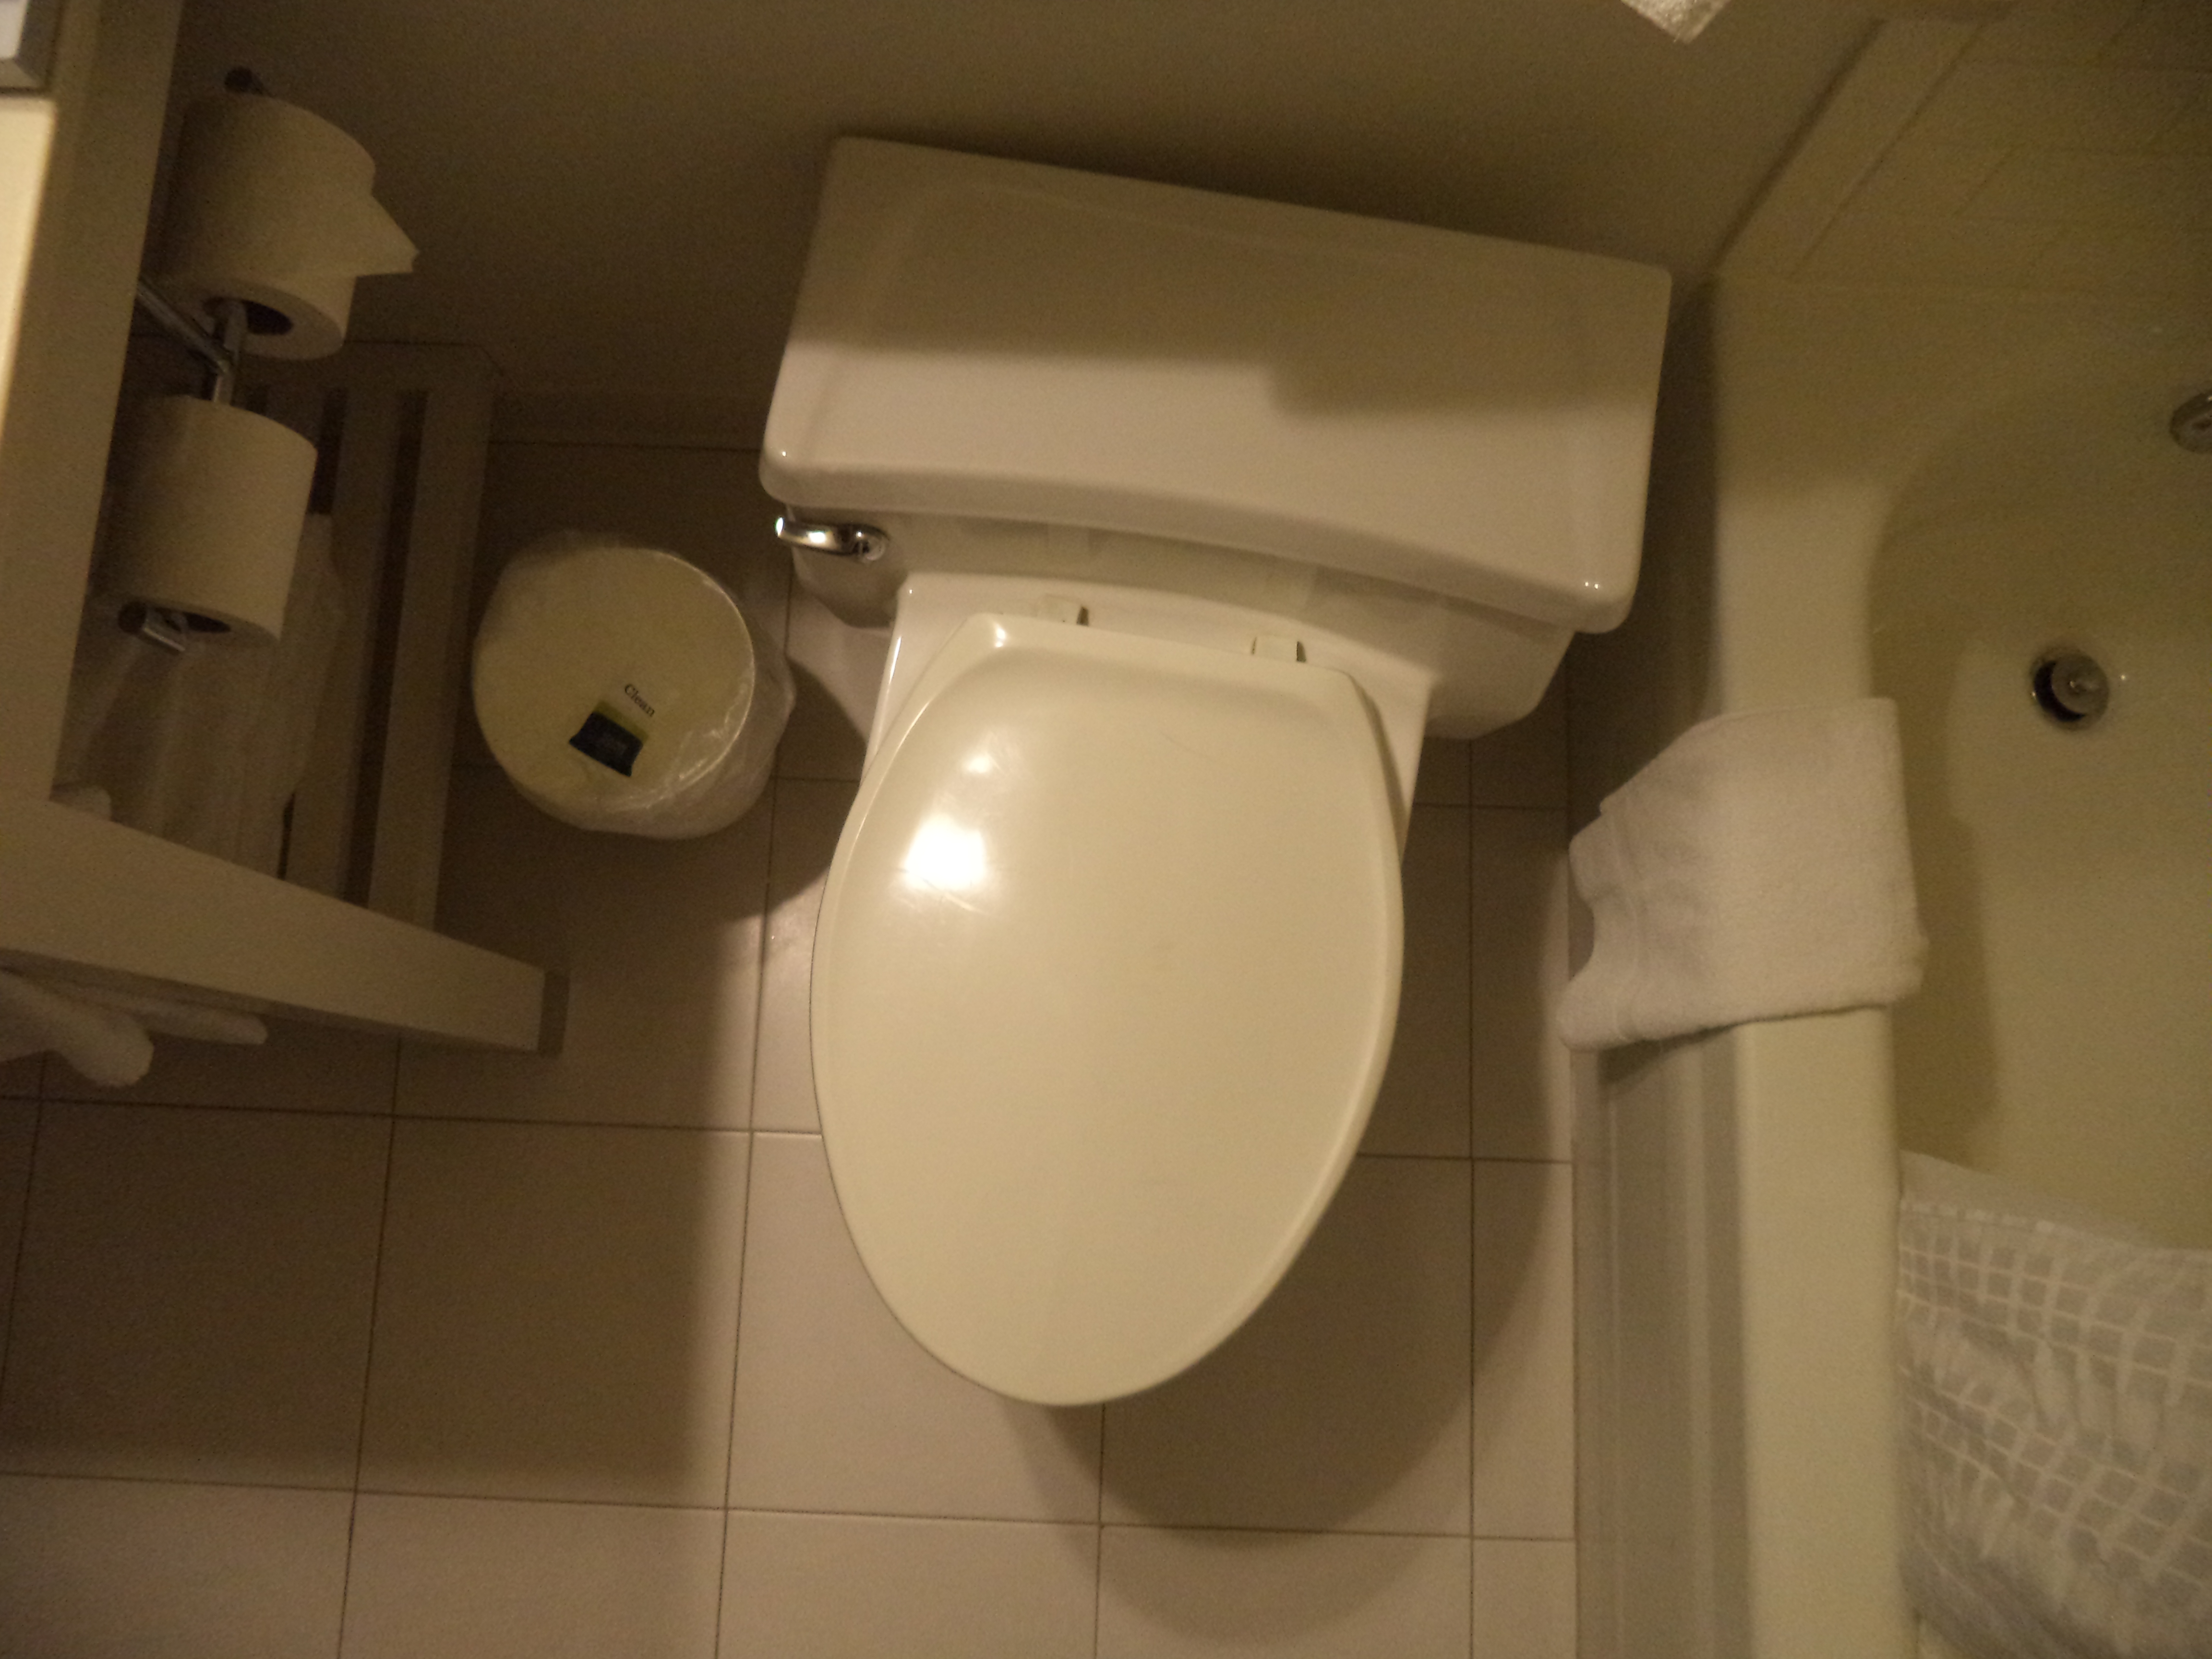 More Bathroom Challenges To OCD Sufferers